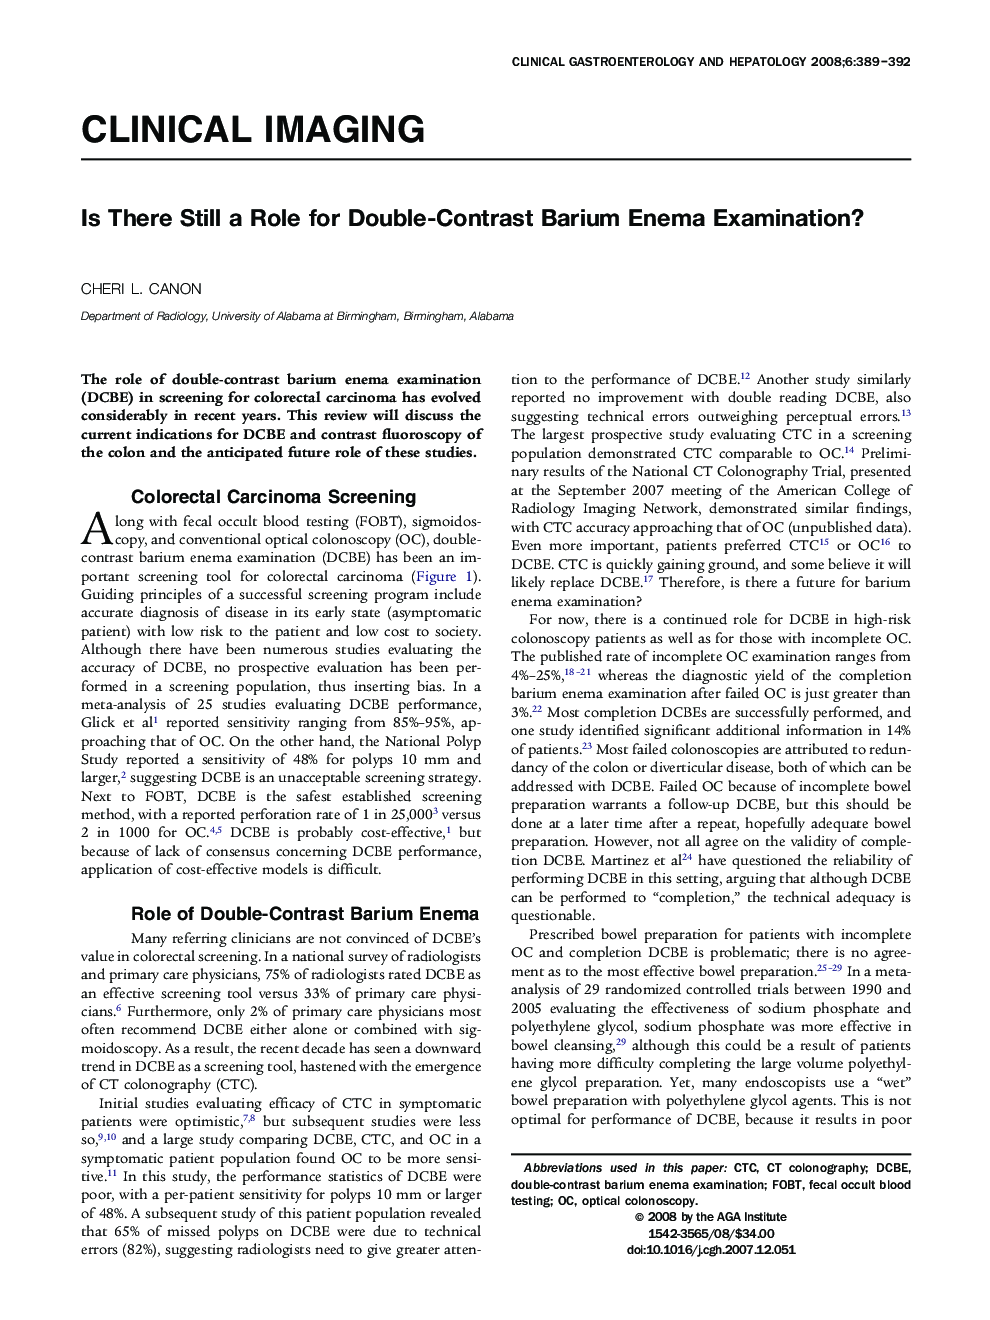 Is There Still a Role for Double-Contrast Barium Enema Examination?